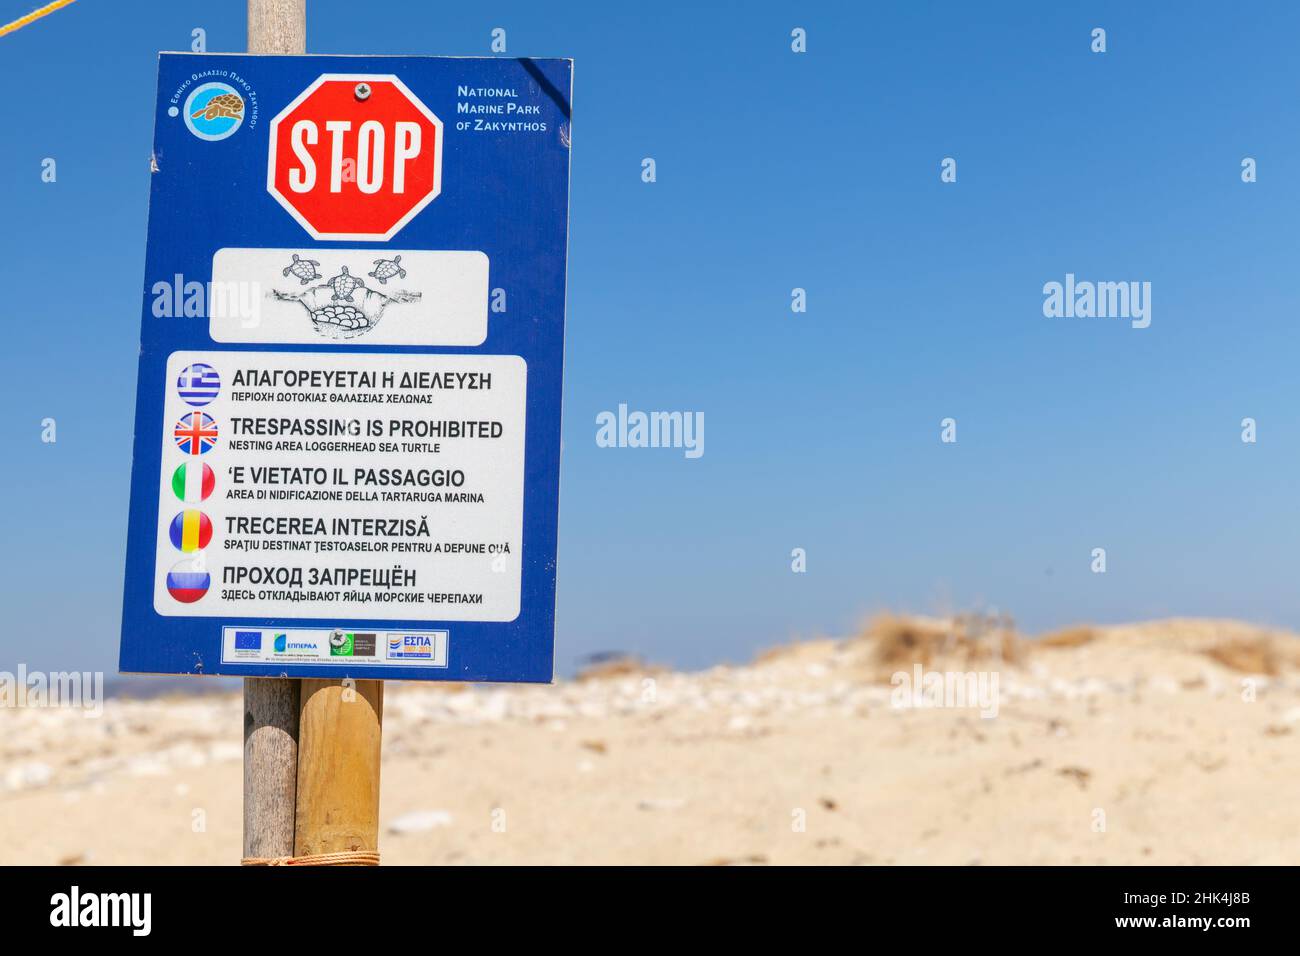 Zakynthos, Greece - August 16, 2016: Stop sign with text in different languages: Trespassing is Prohibited, nesting area loggerhead sea turtle Stock Photo